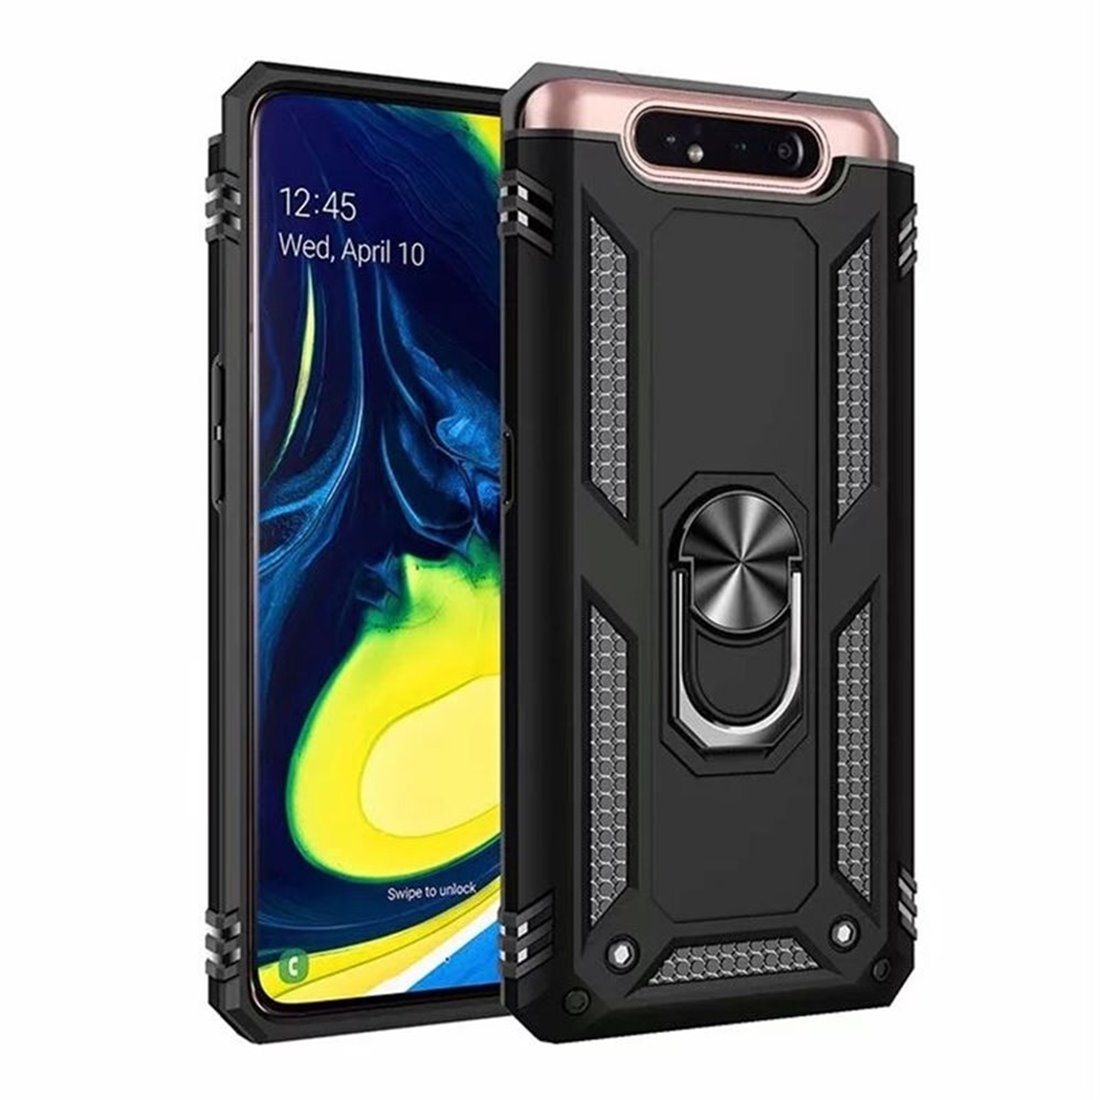 Samsung Galaxy A80/A90 Plastic Black Back Cover - Solid ring